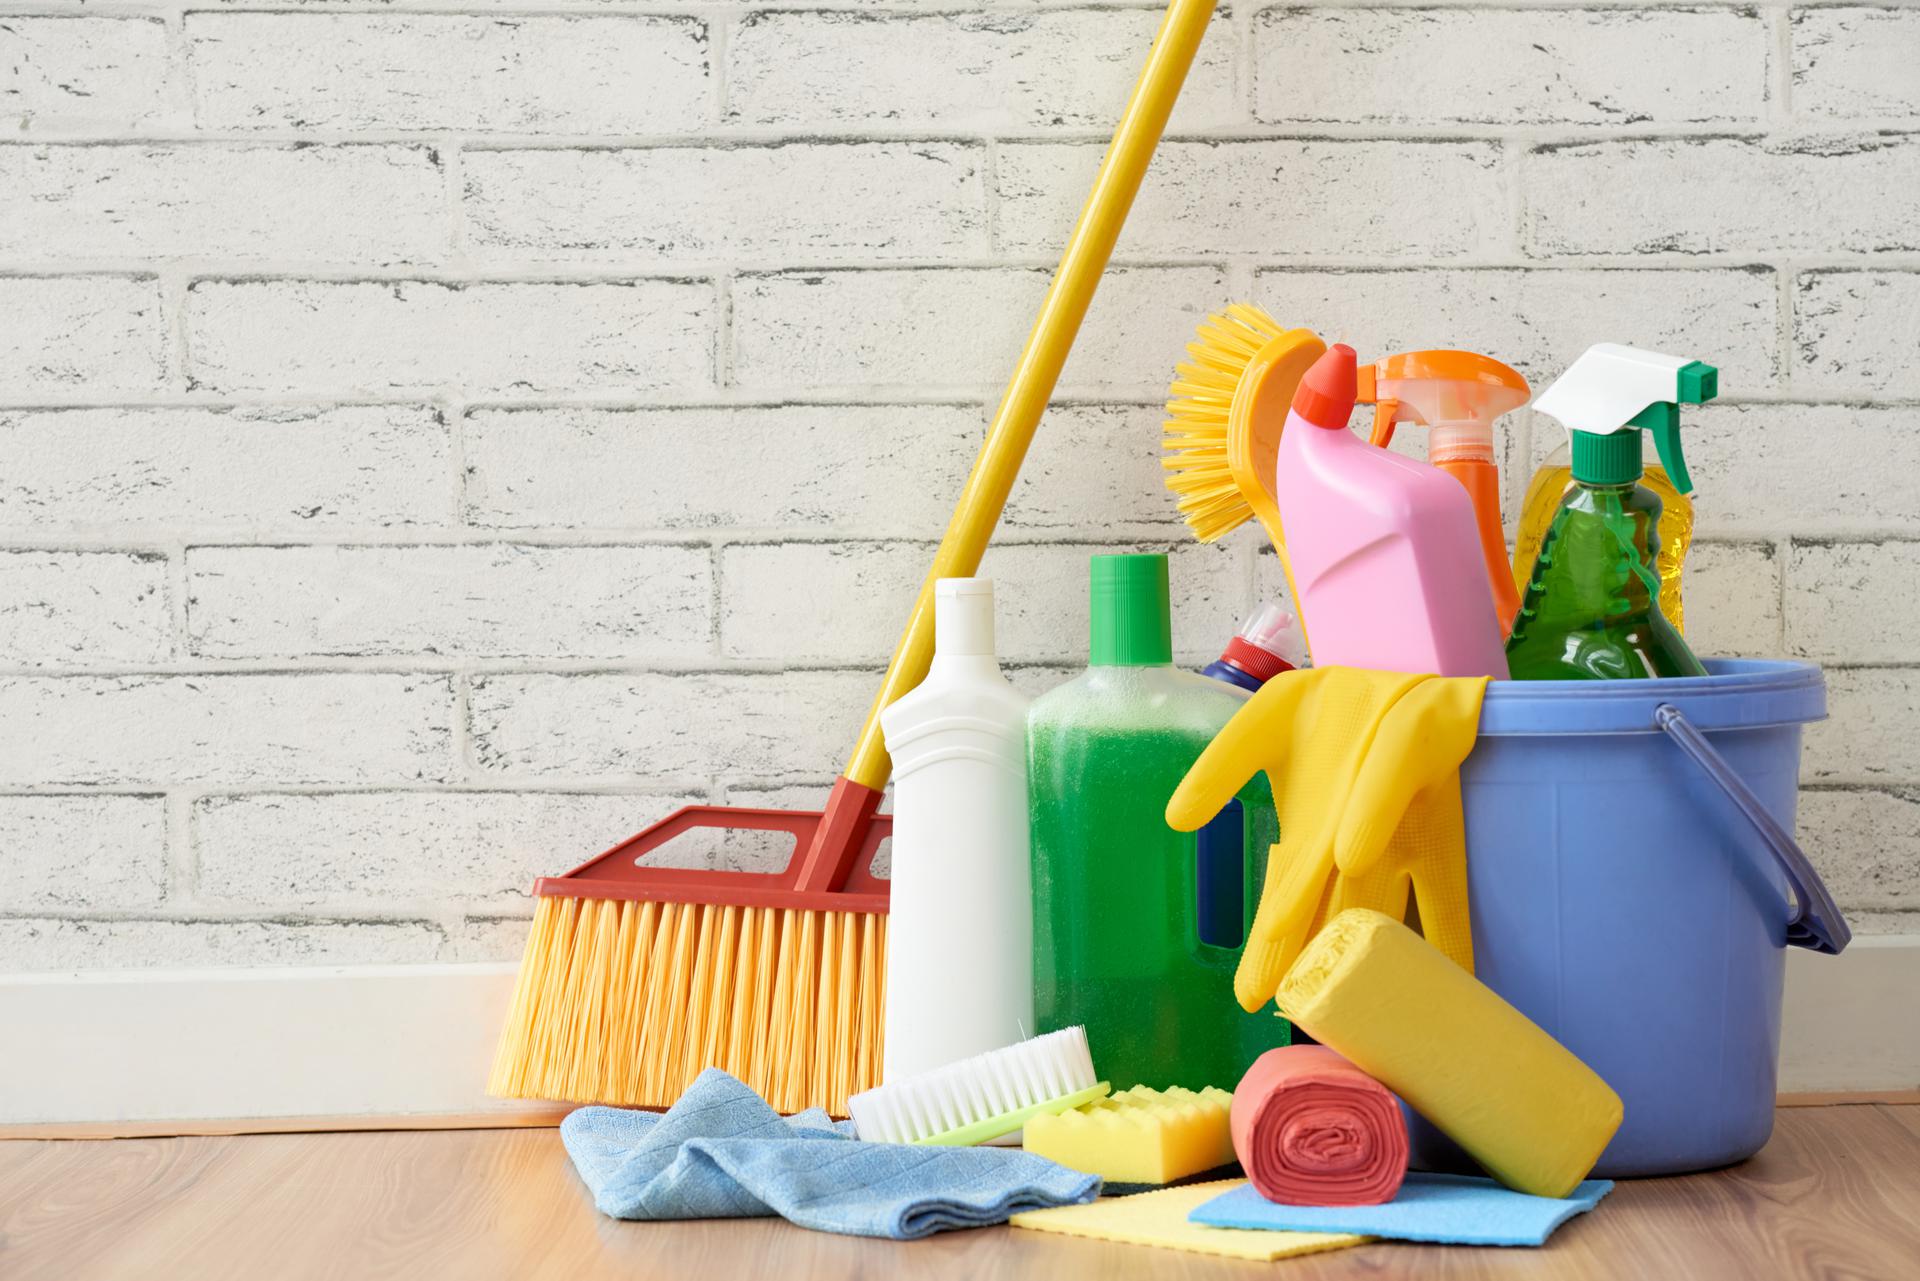 Chesapeake Homes Tips That Will Make Spring Cleaning a Breeze!